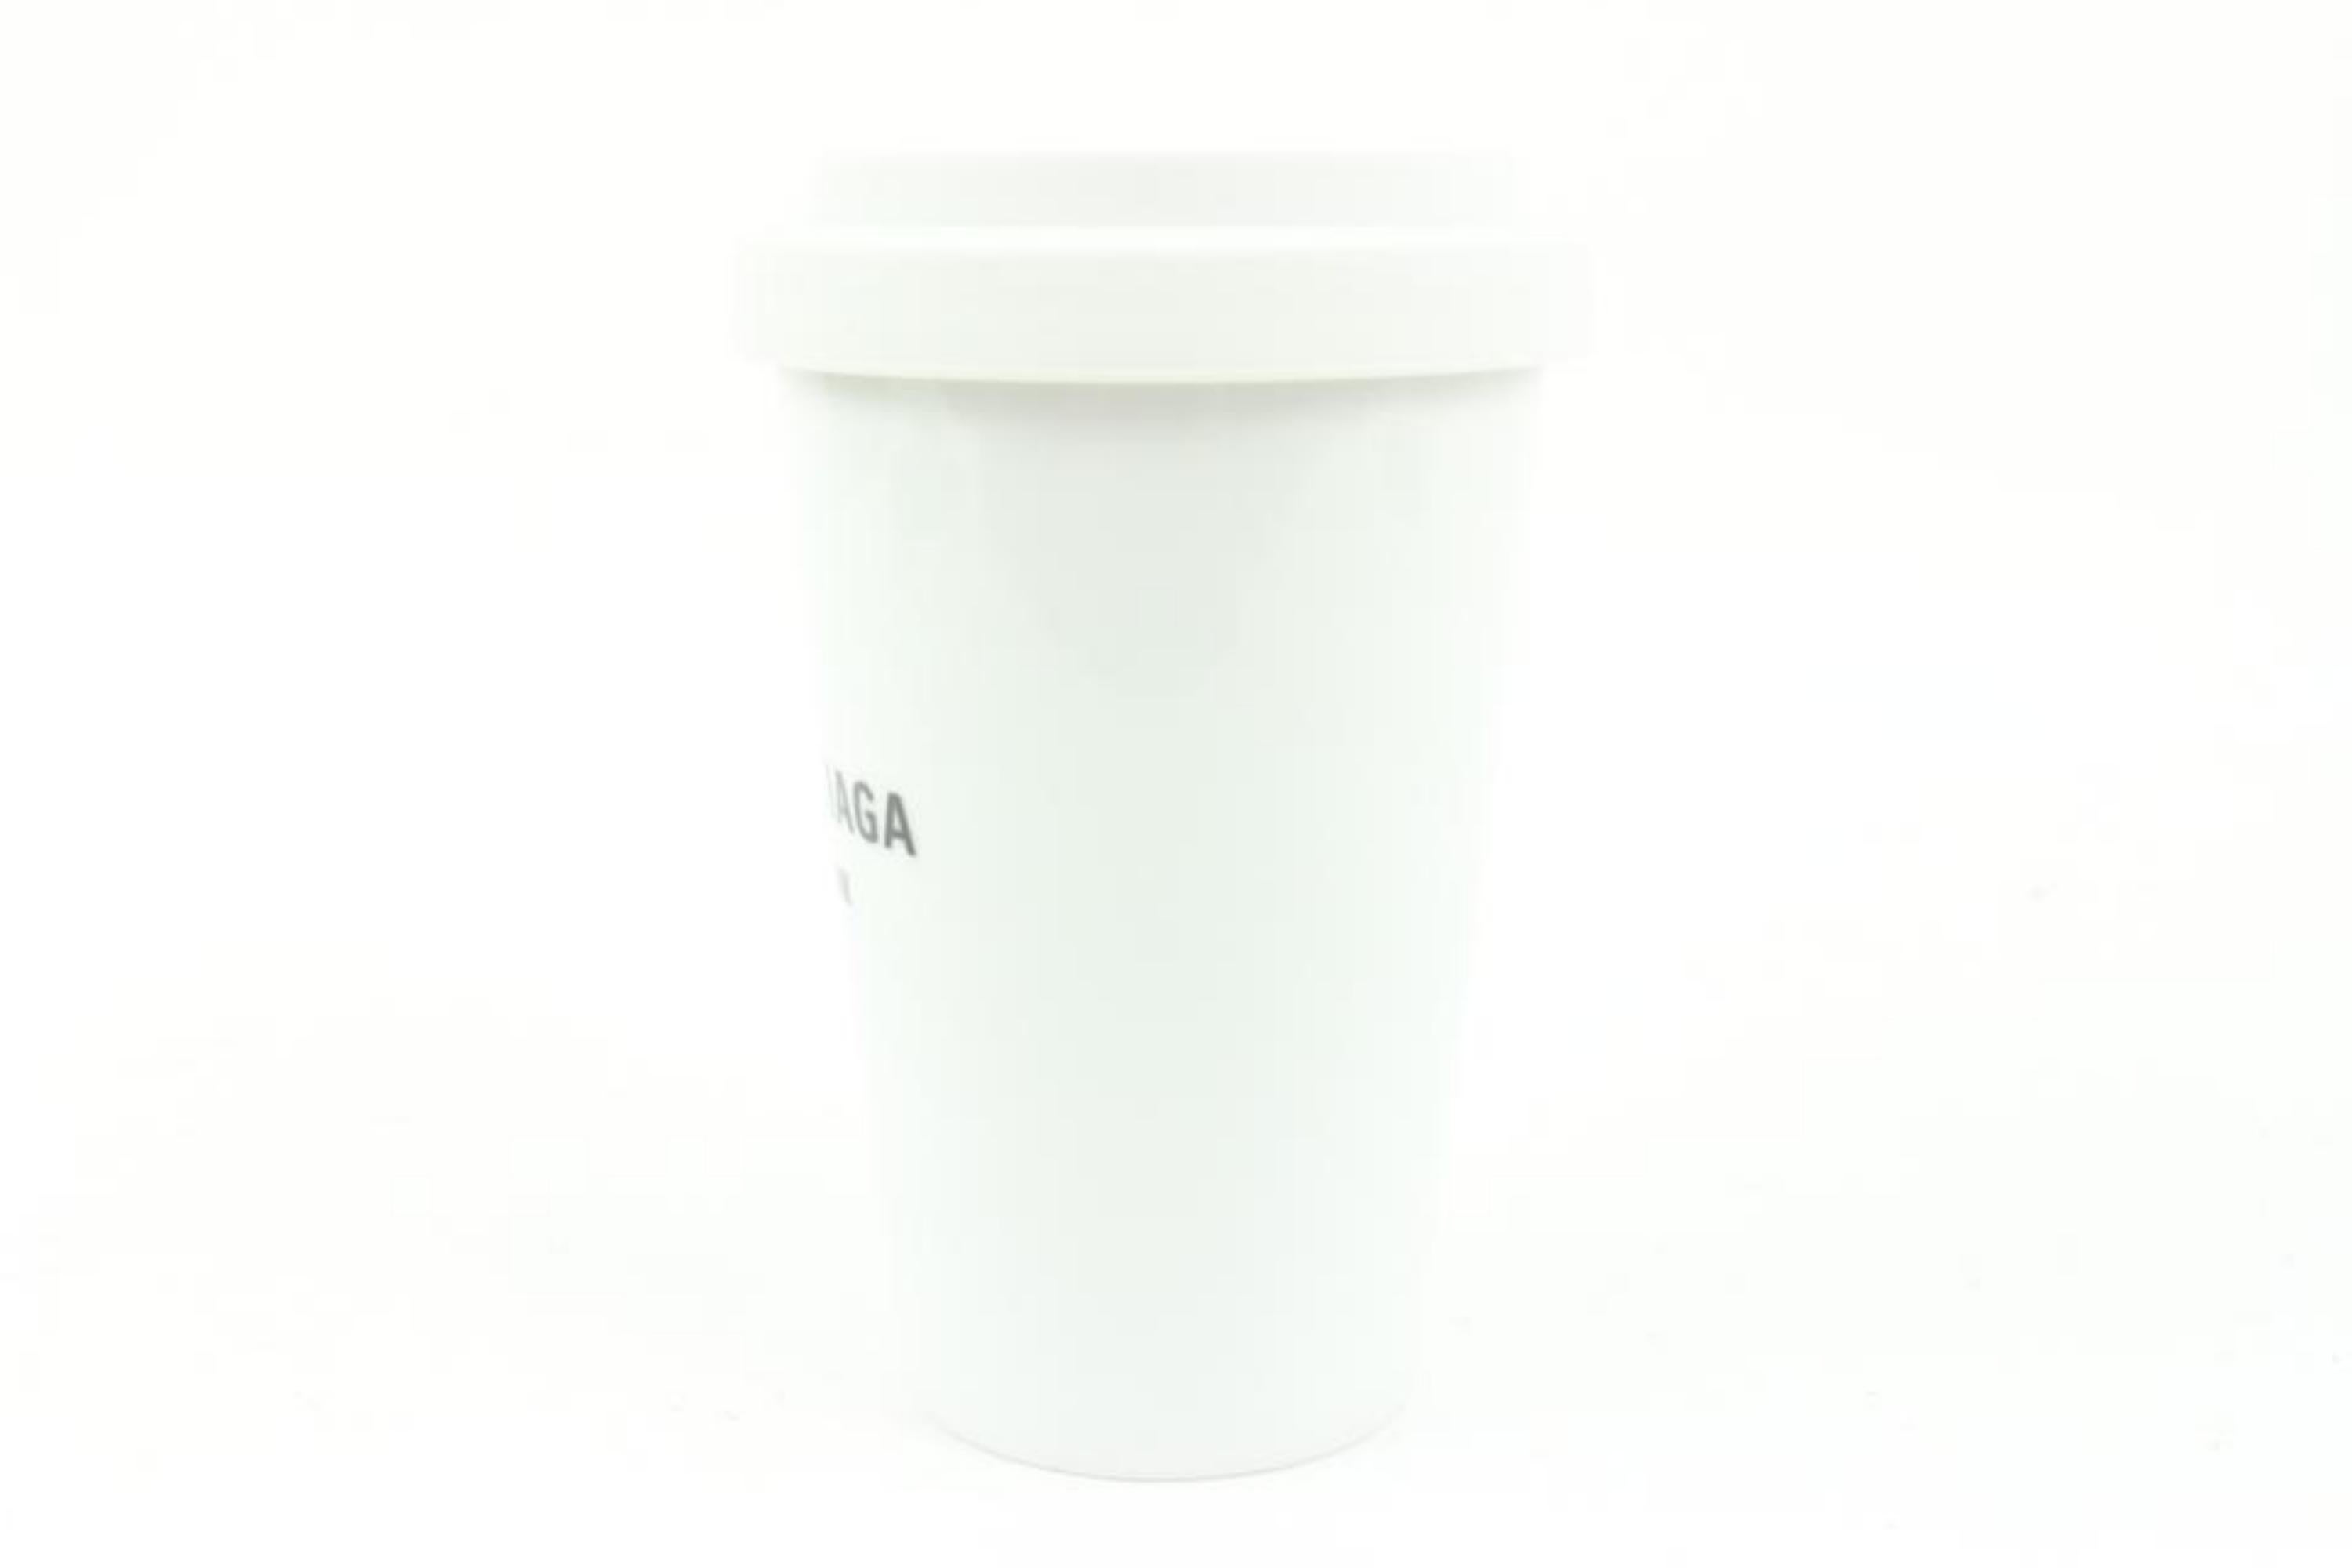 Balenciaga Limited Sold Out White New York Cities Coffee Cup 80ba24s 3